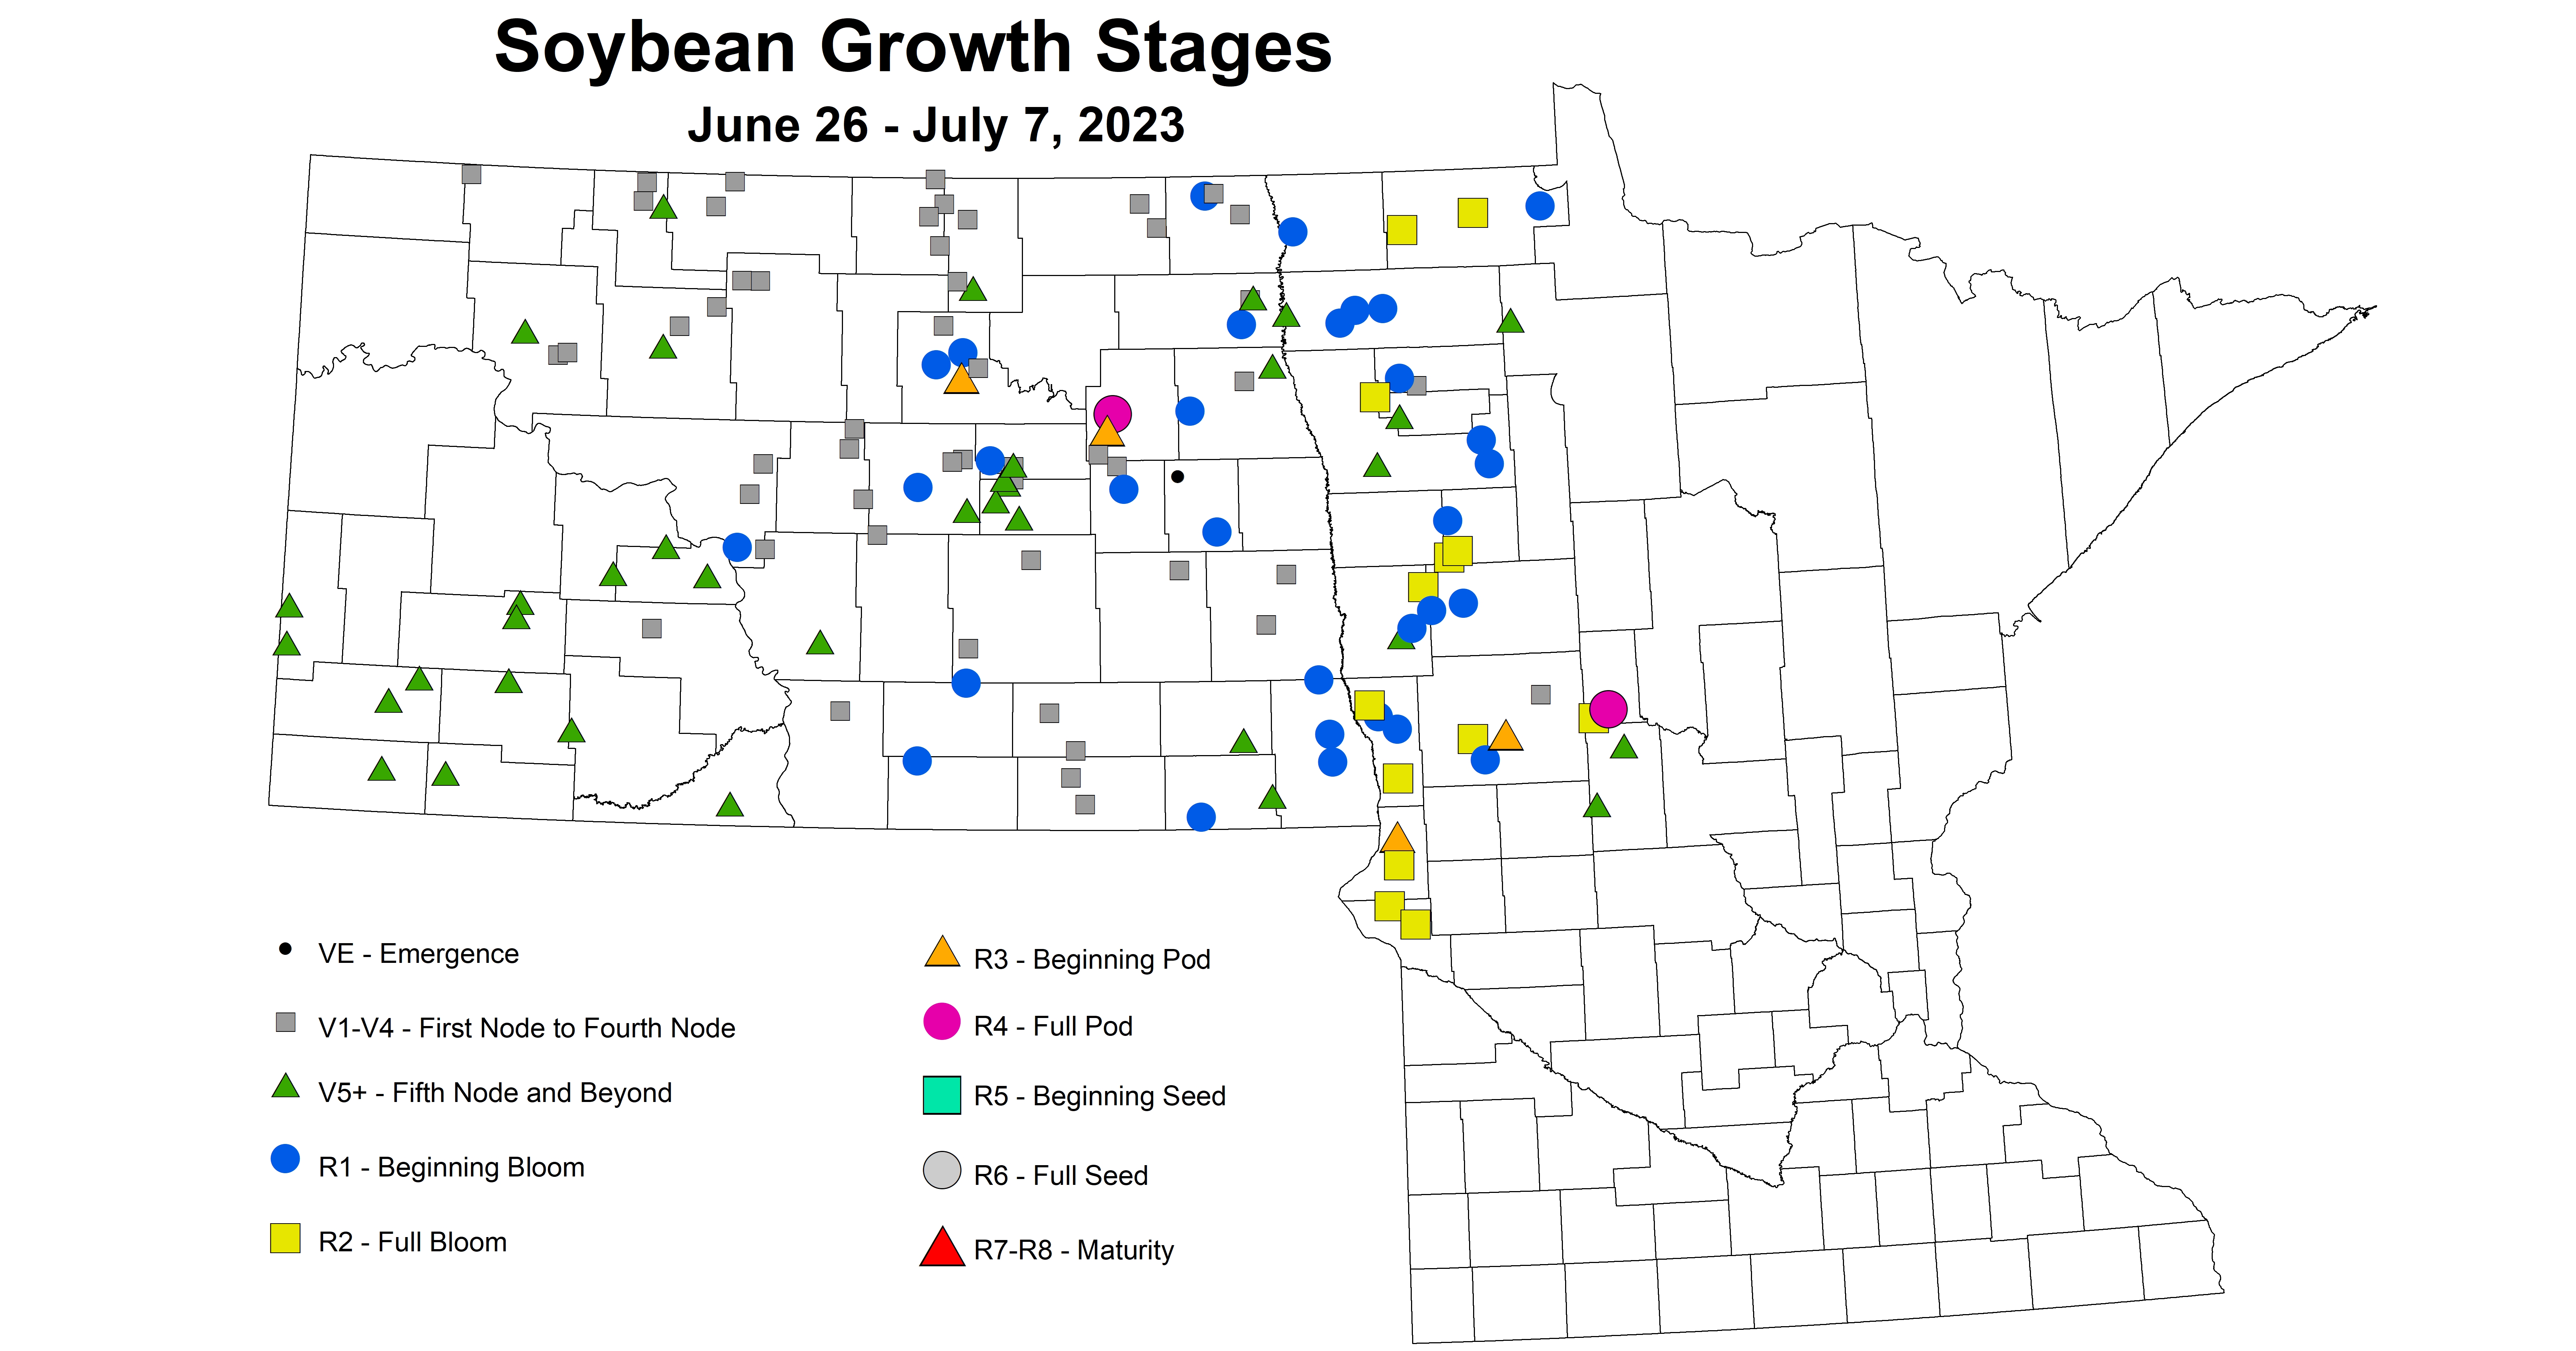 soybean growth stages June 26 - July 7 2023